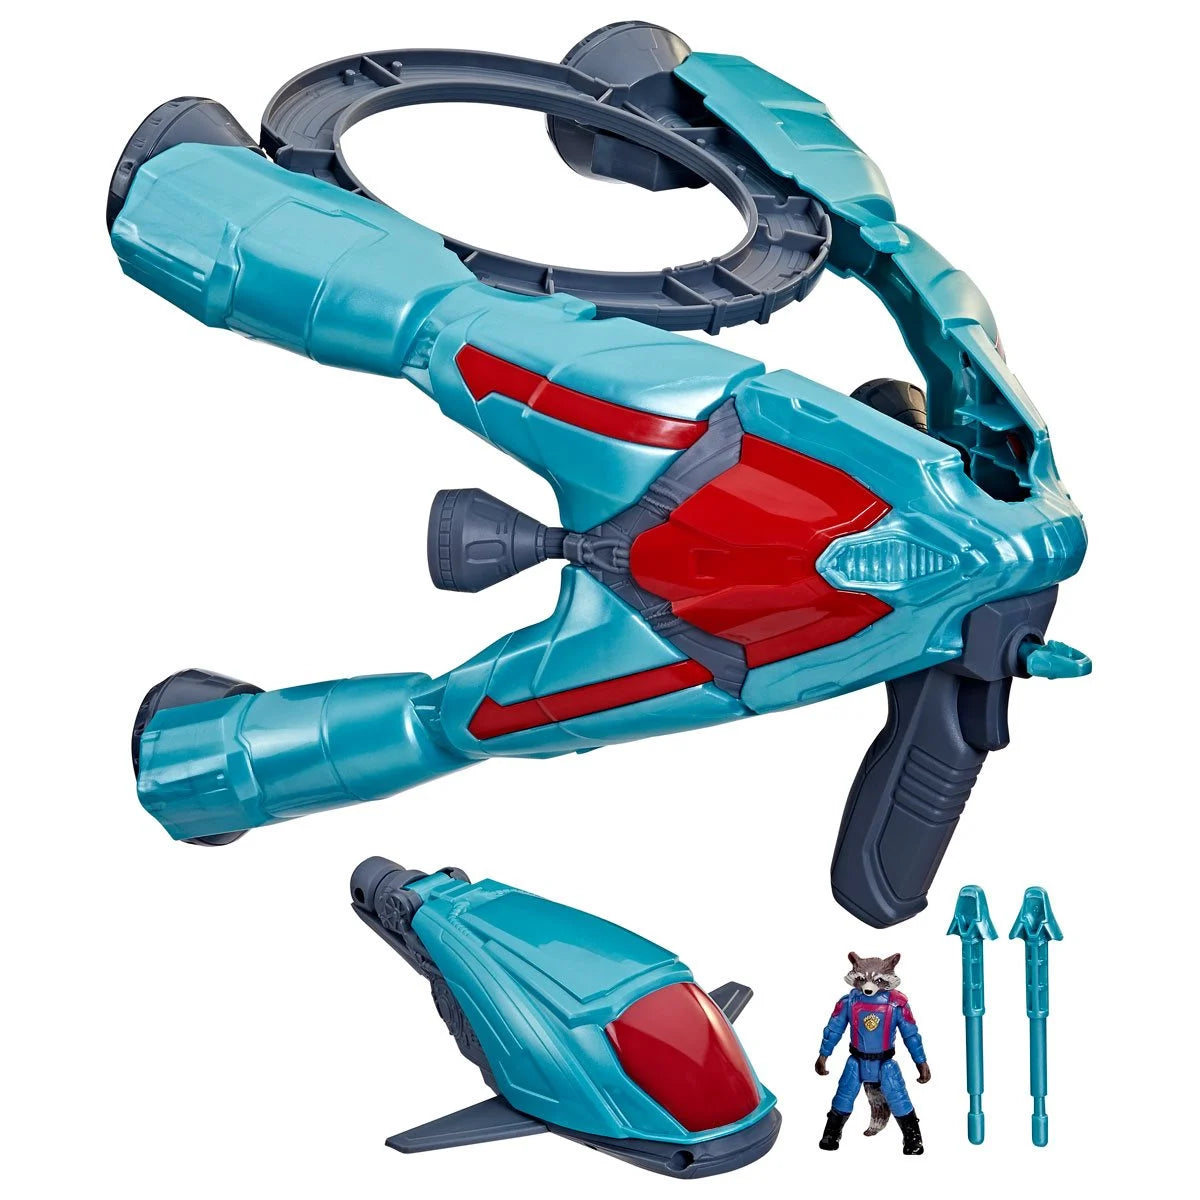 Marvel Guardians of The Galaxy Vol. 3 Galactic Spaceship, Marvel’s Rocket Action Figure with Vehicle and Blaster